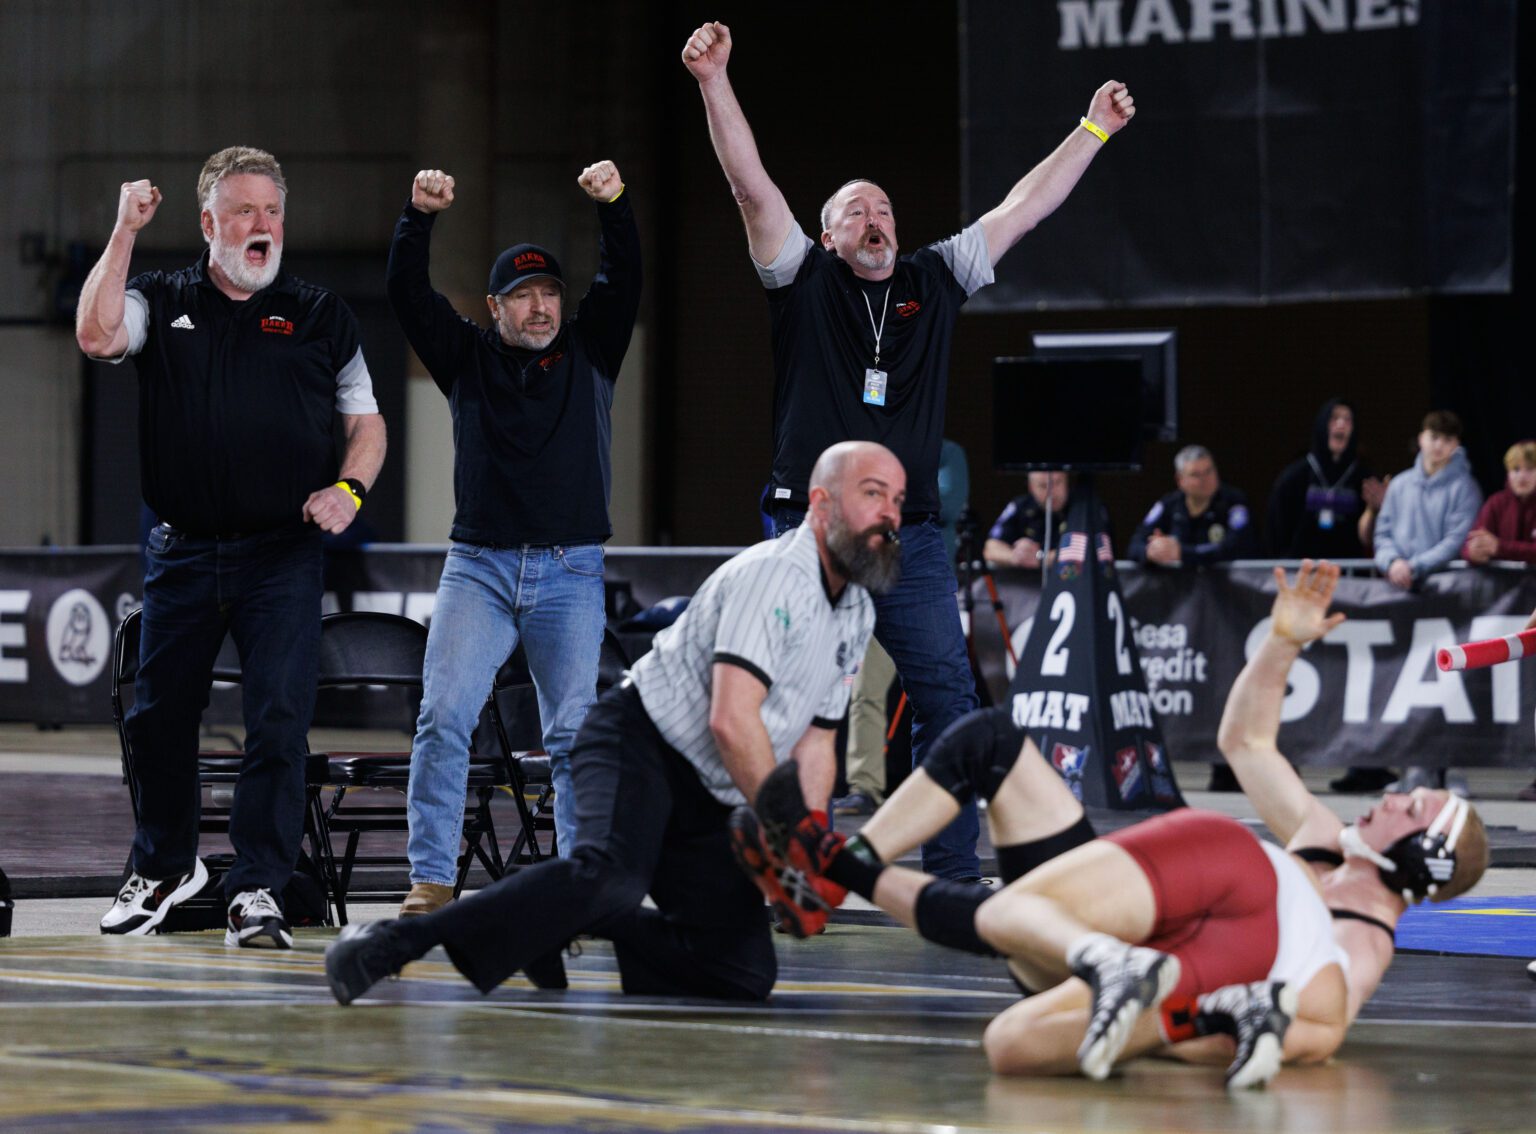 Mount Baker wrestling coaches celebrate after senior Elijah Washburn pins Toppenish's Amando Johns to win the Class 1A boys 170-pound state championship Feb. 18 at Mat Classic XXXIV at the Tacoma Dome.